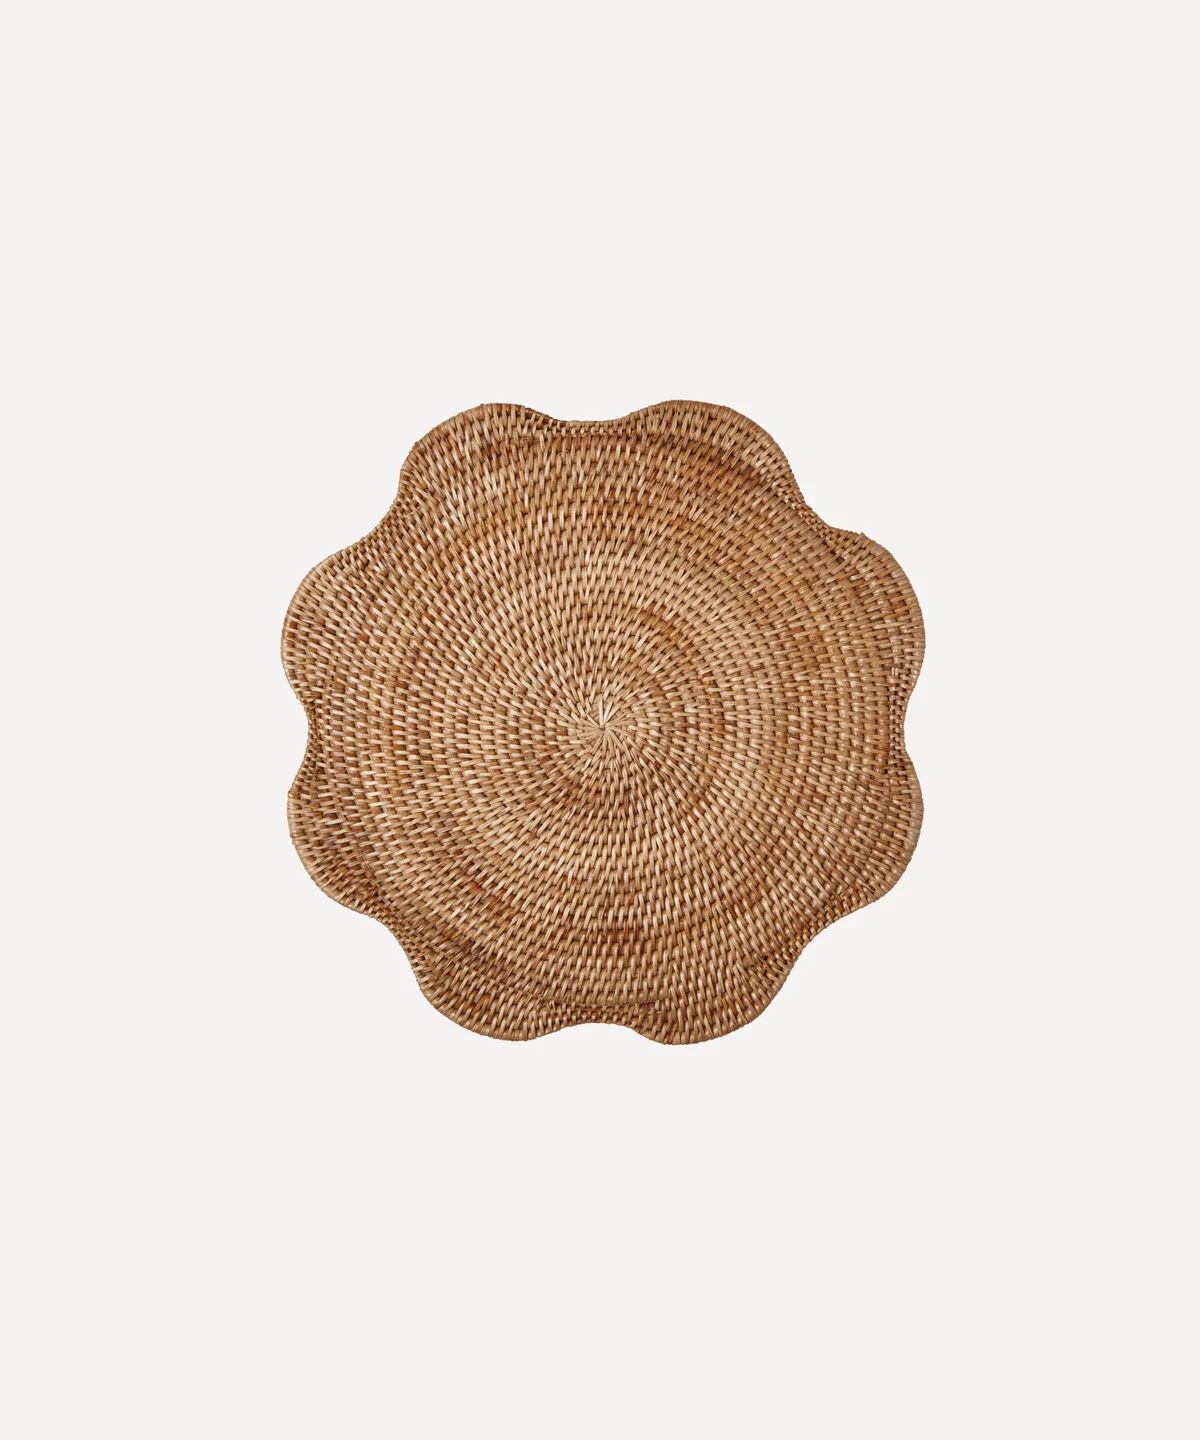 Scalloped Rattan Placemat in Natural | Over The Moon